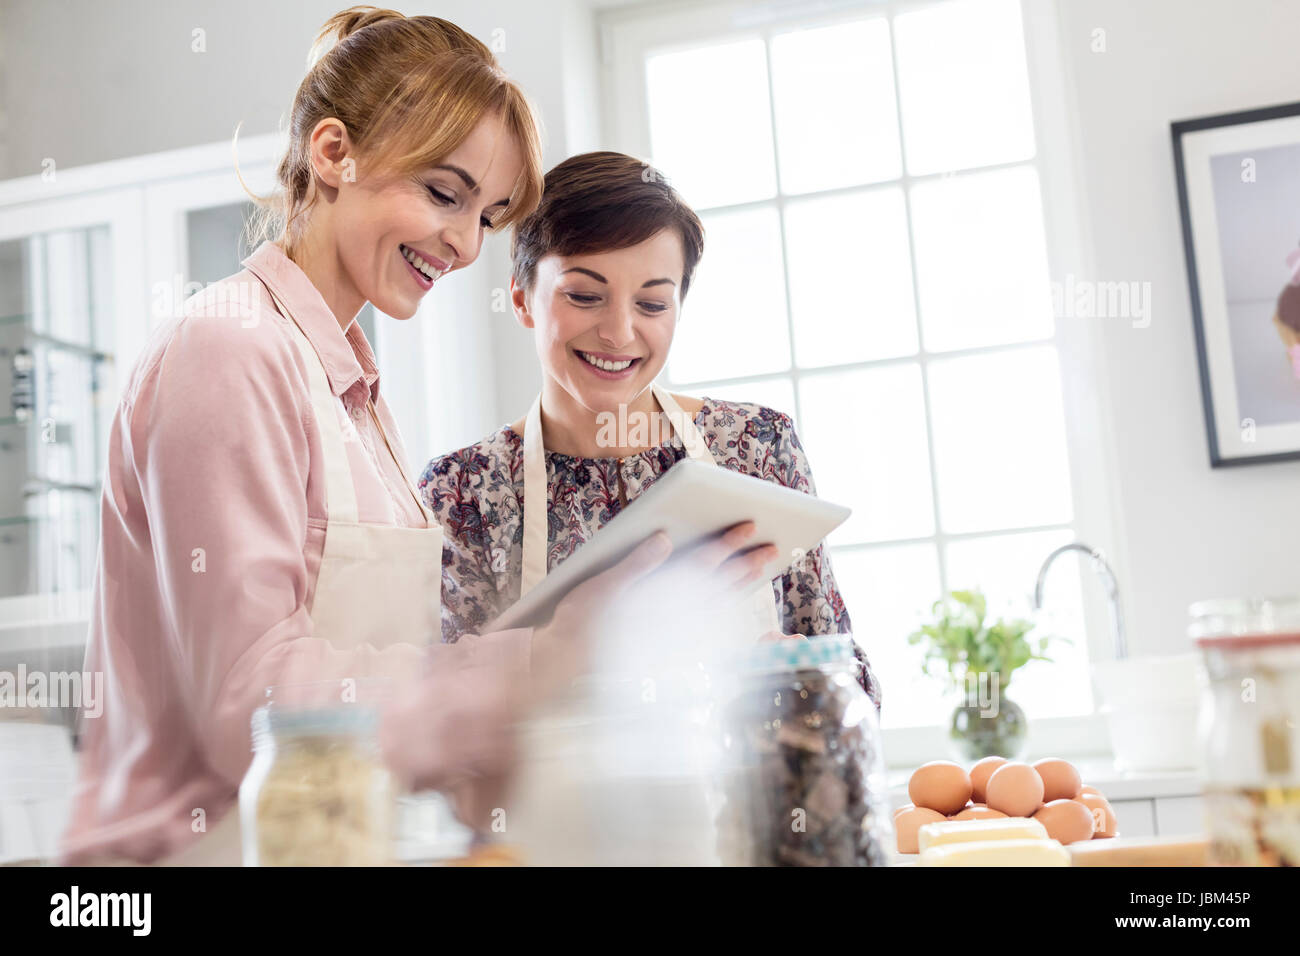 Smiling female caterers using digital tablet, baking in kitchen Stock Photo